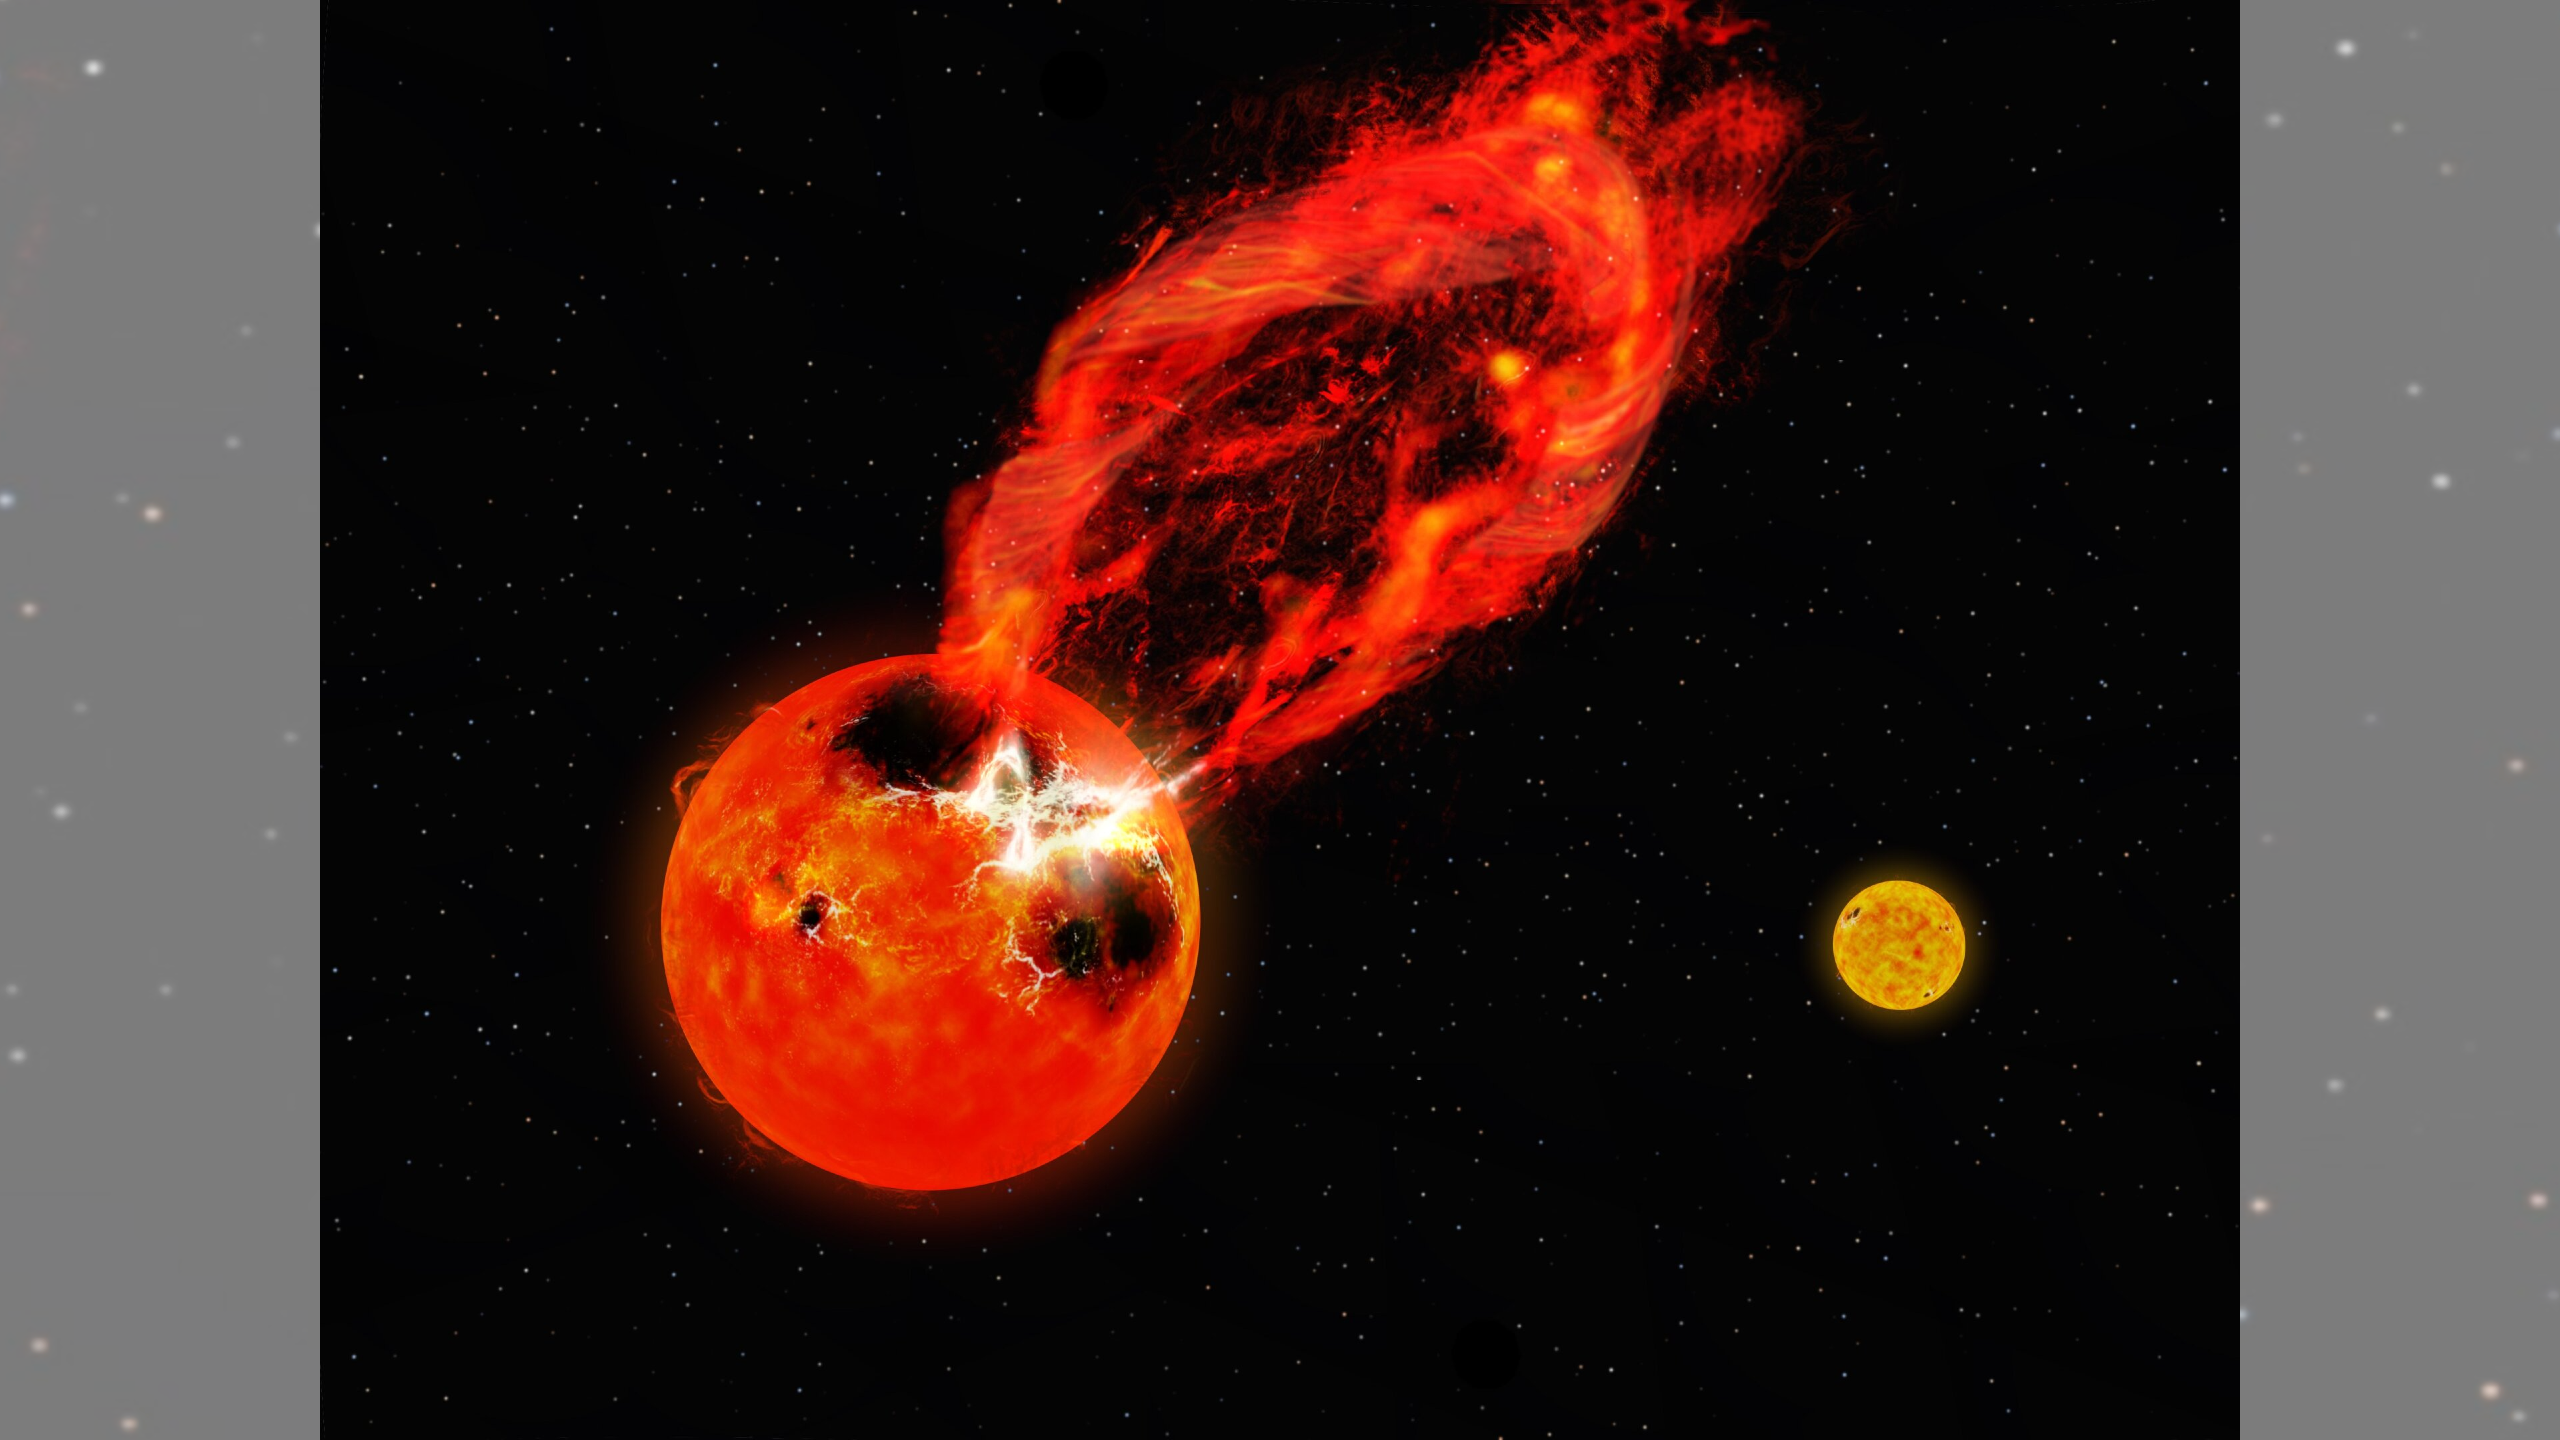 Gargantuan 'superflare' from distant star may have launched one of